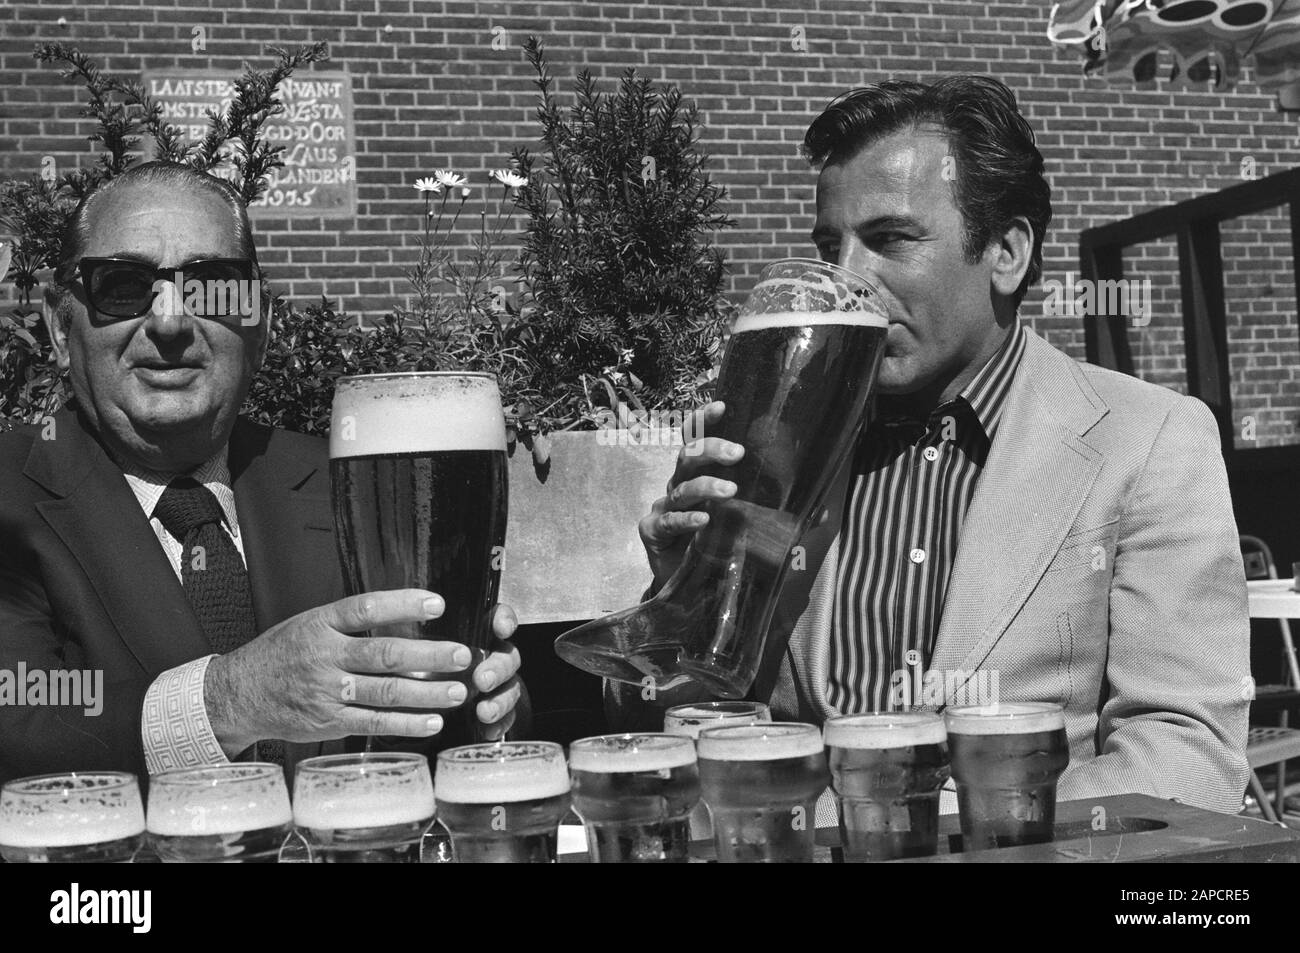 Actor Maximilian Schell in a Brug at Ver, gives press conference in Amsterdam, left producer Levine, right Schell with boot beer Date: June 13, 1976 Location: Amsterdam, Noord-Holland Keywords: actors, film producers, films, movie stars, press conferences Personal name: Levine James A, Schell Maximilian Stock Photo